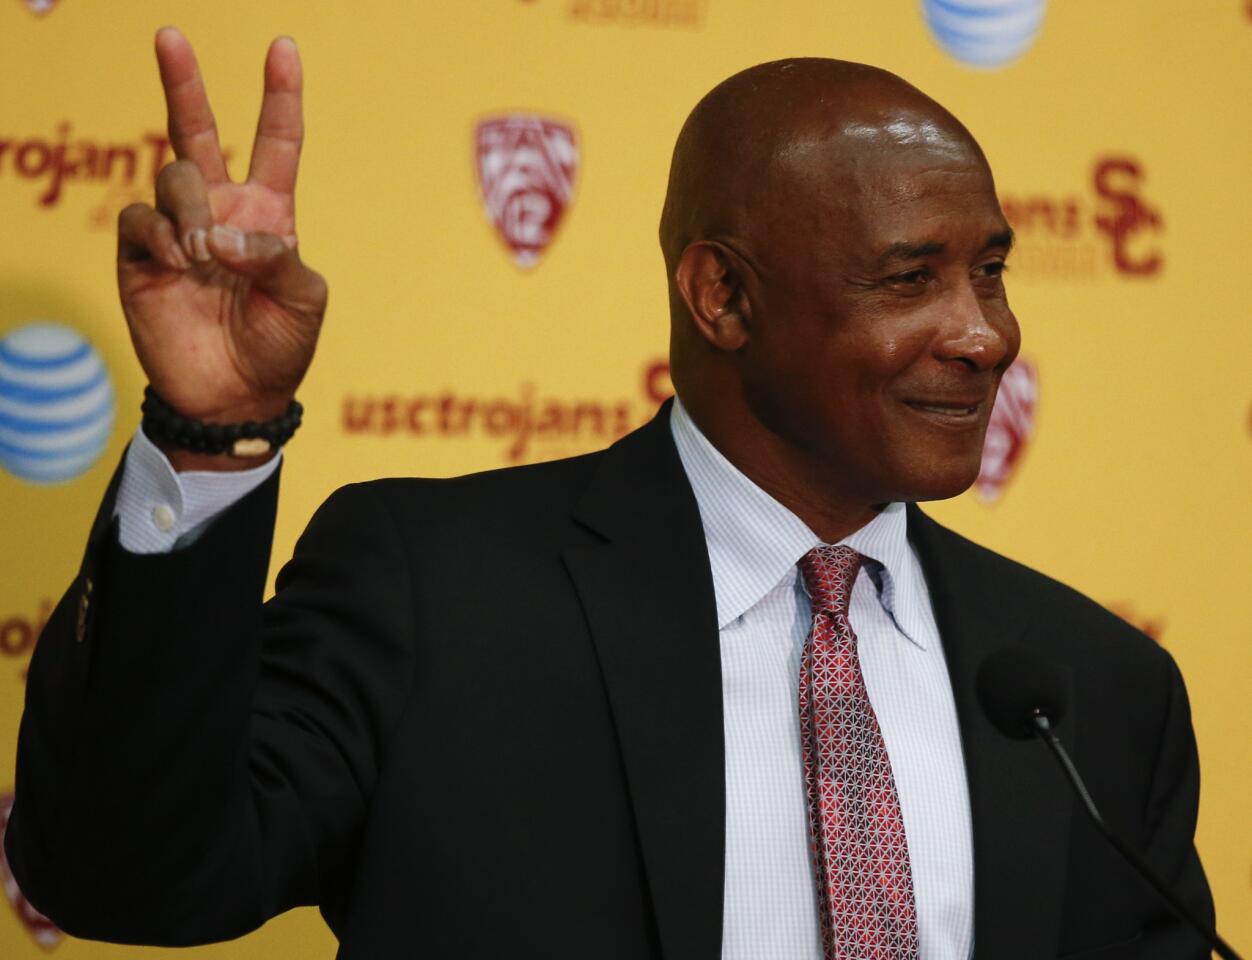 New USC Athletic Director Lynn Swann speaks at a news conference Thursday in the John McKay Center.